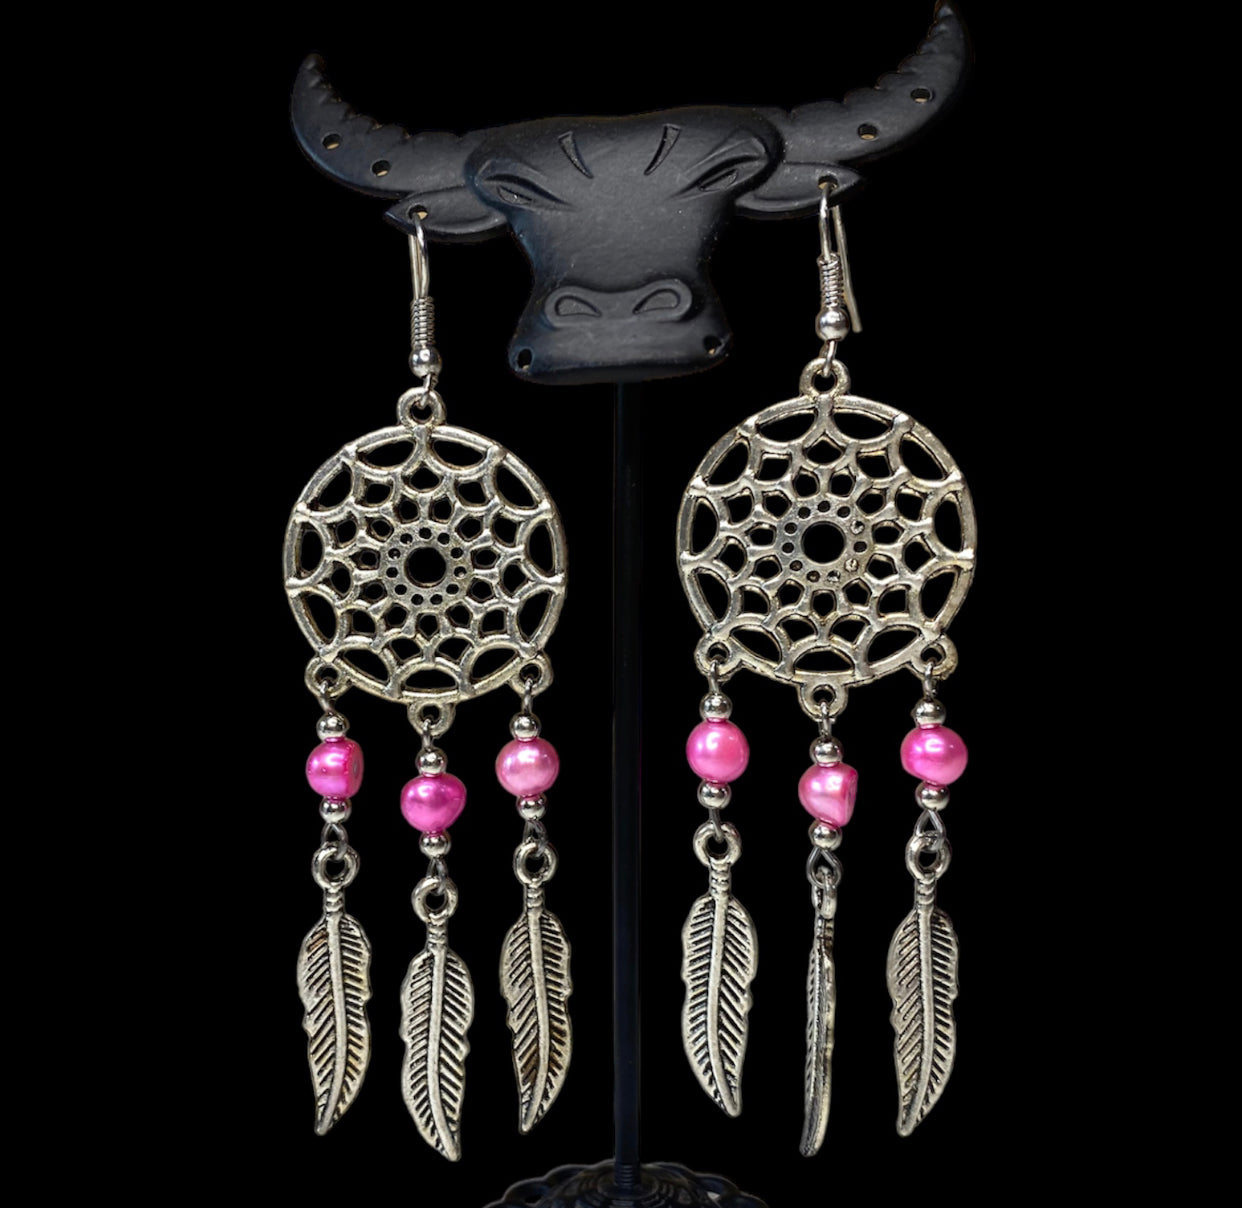 J6438 - Pink Dream Catcher Earring with Feathers